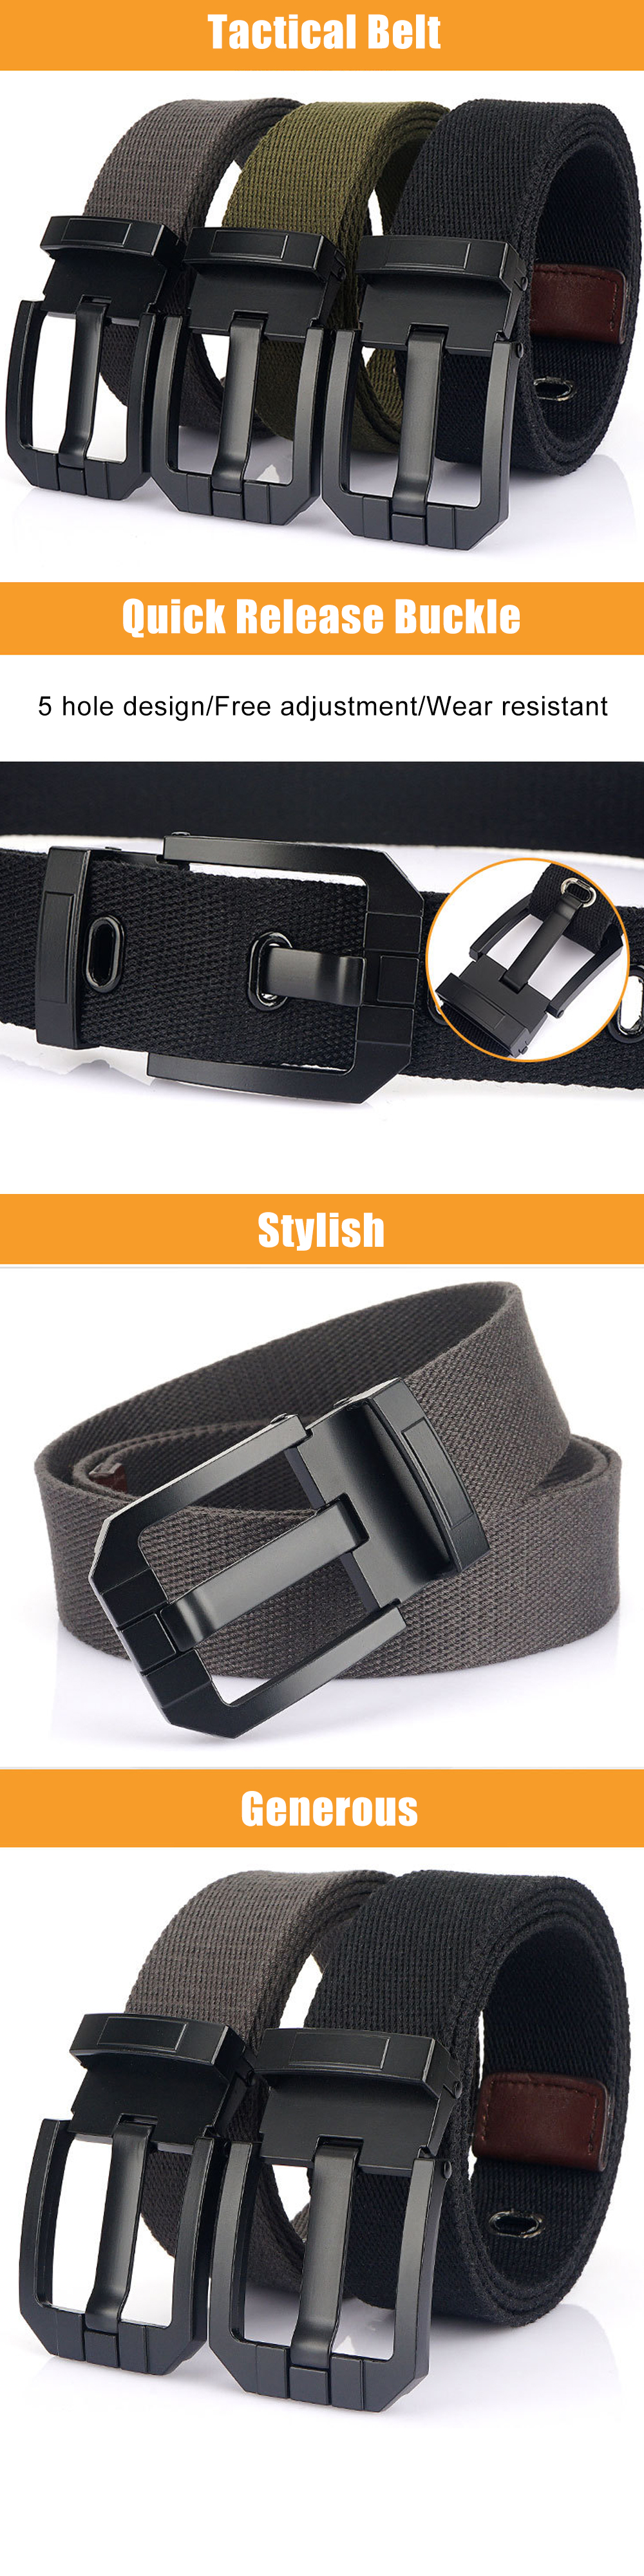 AWMN-Tactical-Canvas-Belt-Adjustable-Length-Breathable-and-Hardwearing-Outdoor-Mens-Casual-Belt-1875785-1